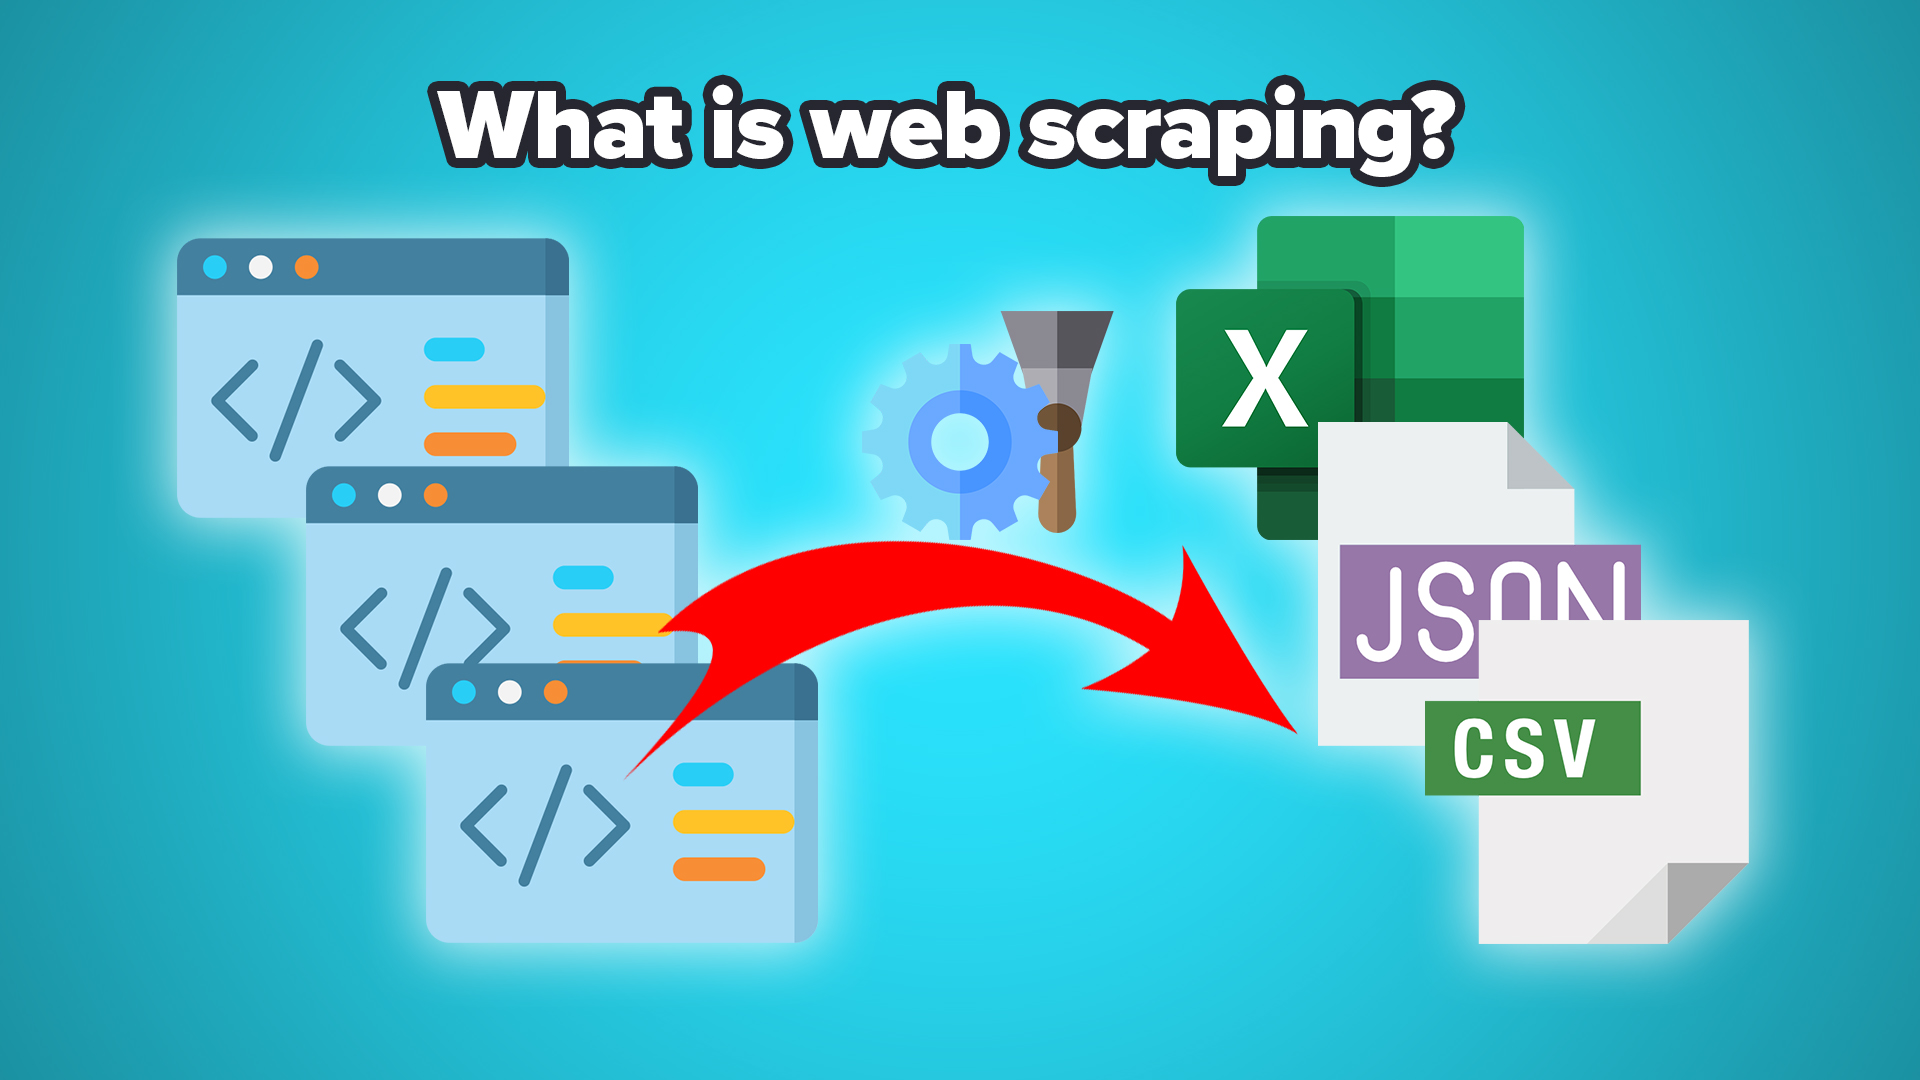 What is a simple example of web scraping?